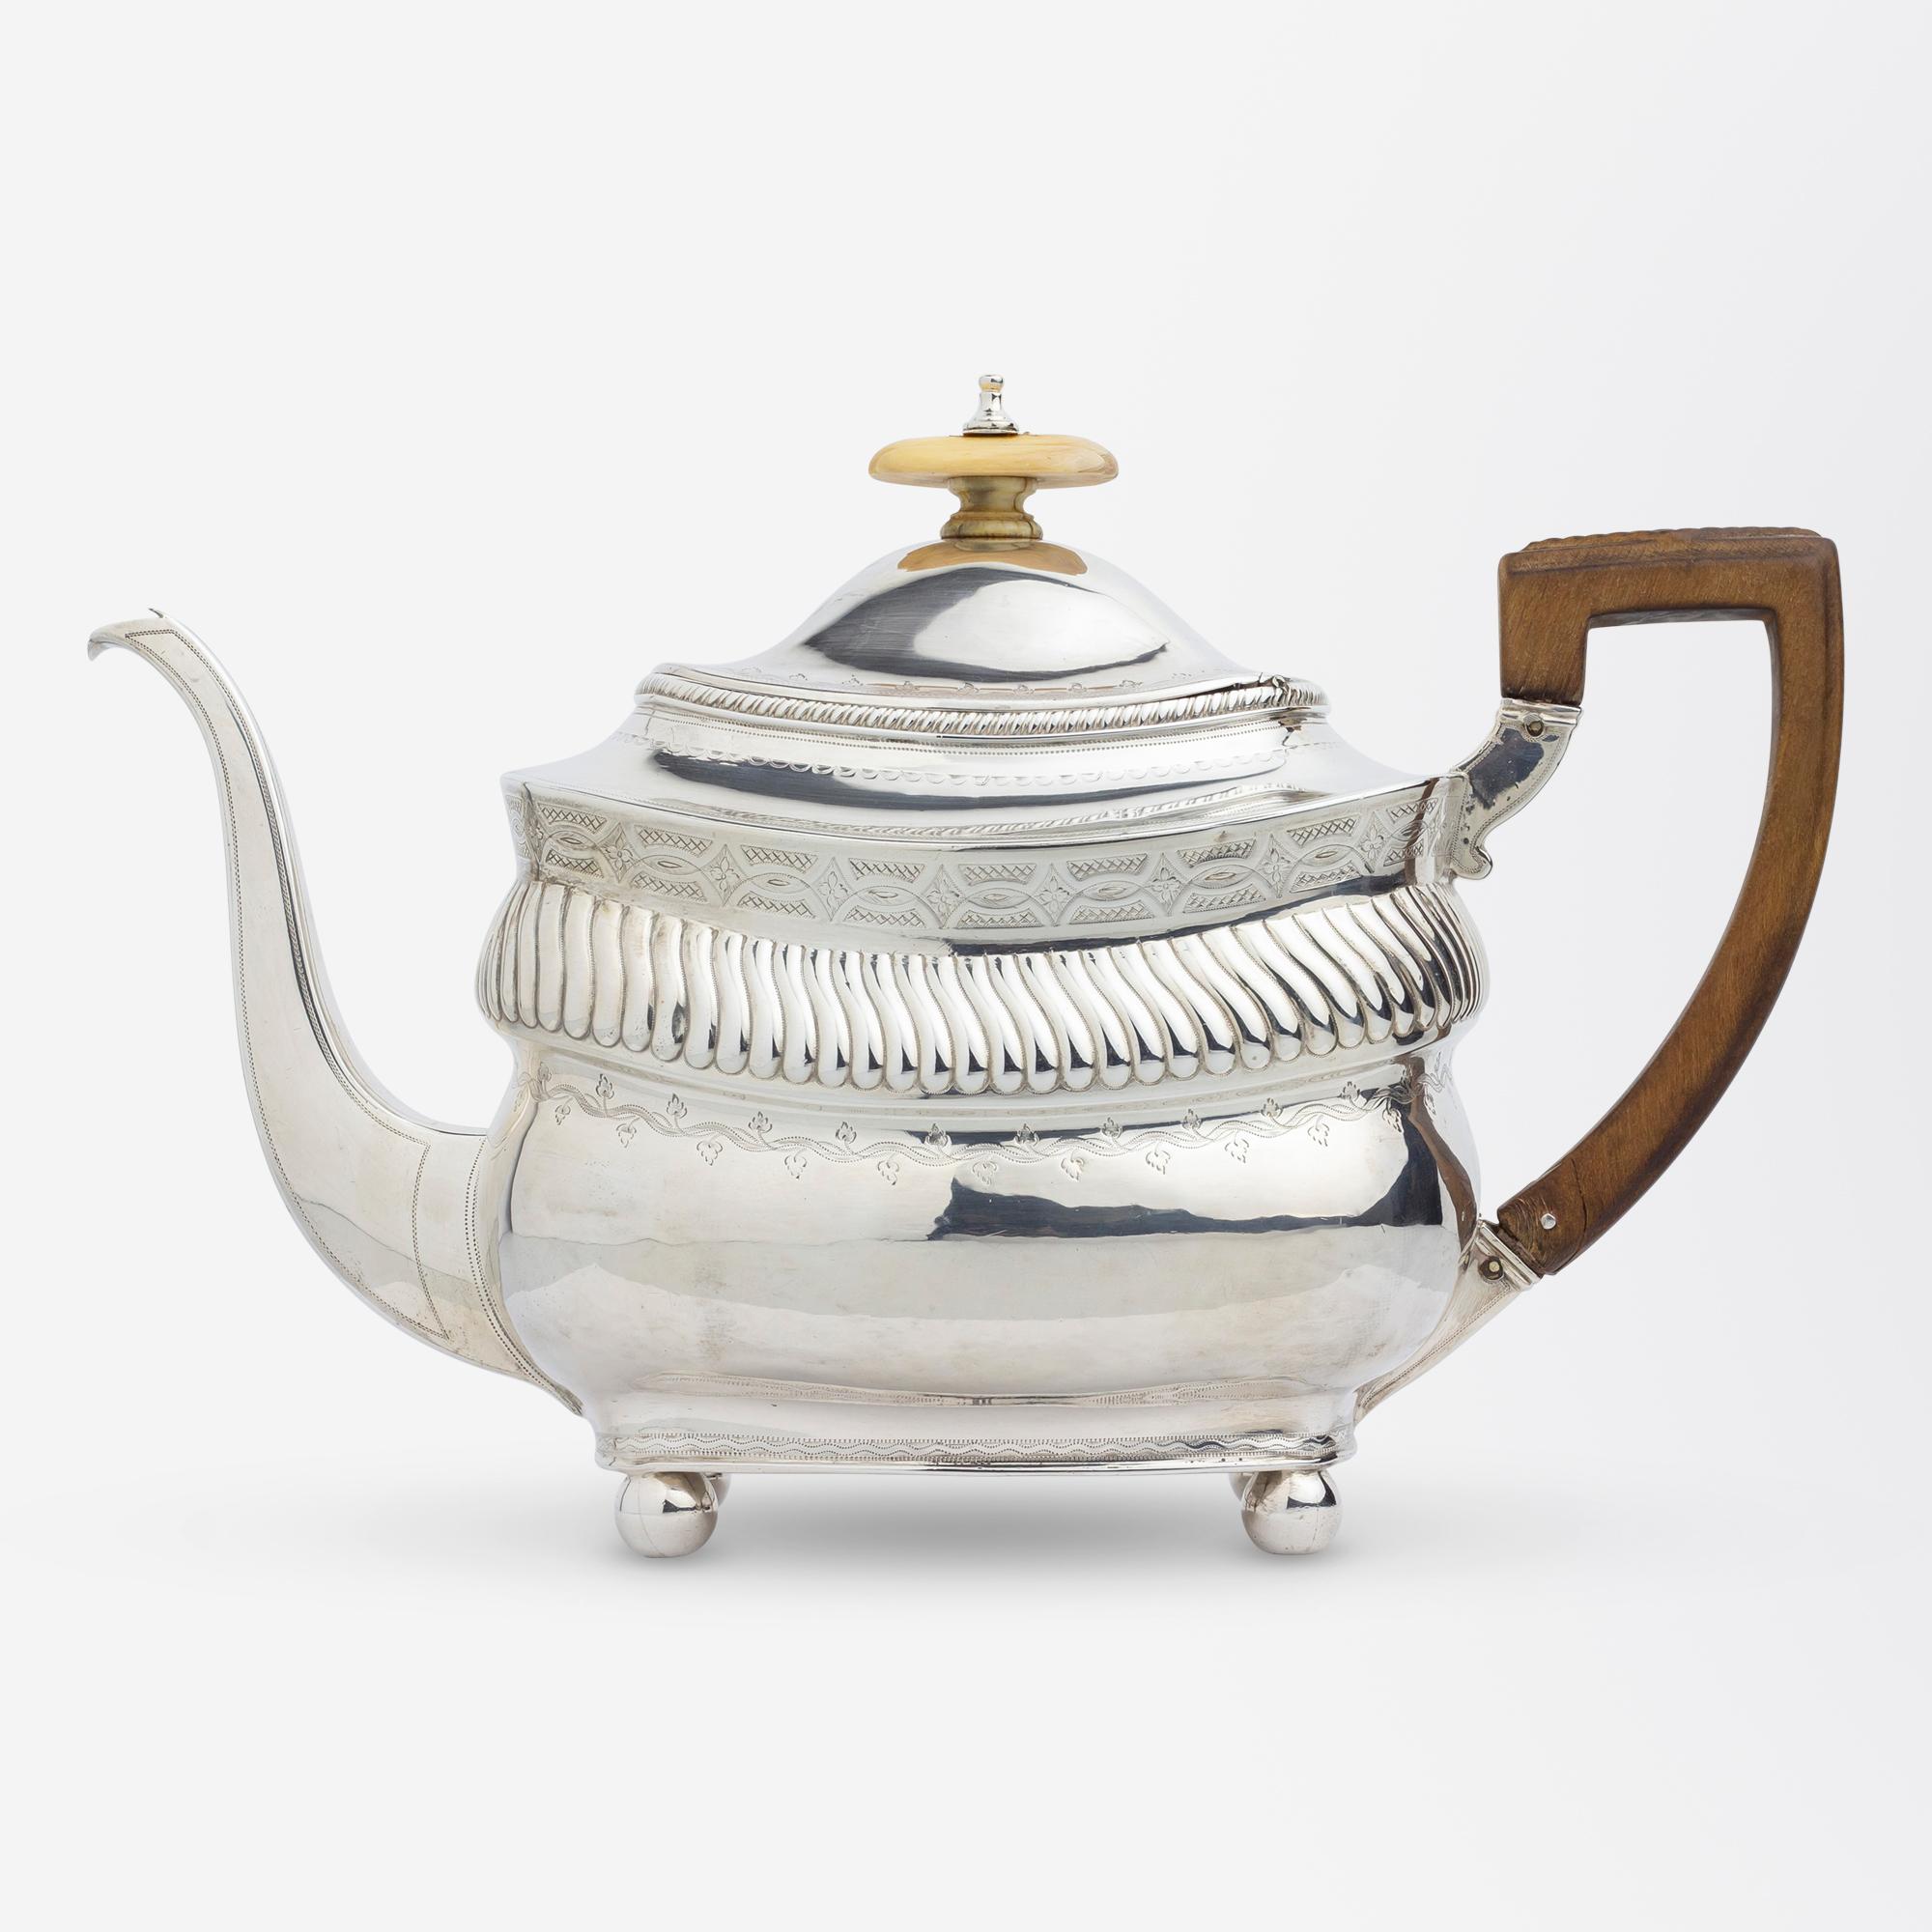 A sterling silver teapot with timber handle and bone finial by Peter & William Bateman of the famed silversmithing Bateman family. The teapot sits atop ball feet and features engraved vines, a ribbed scalloped band, and a patterned frieze. To one